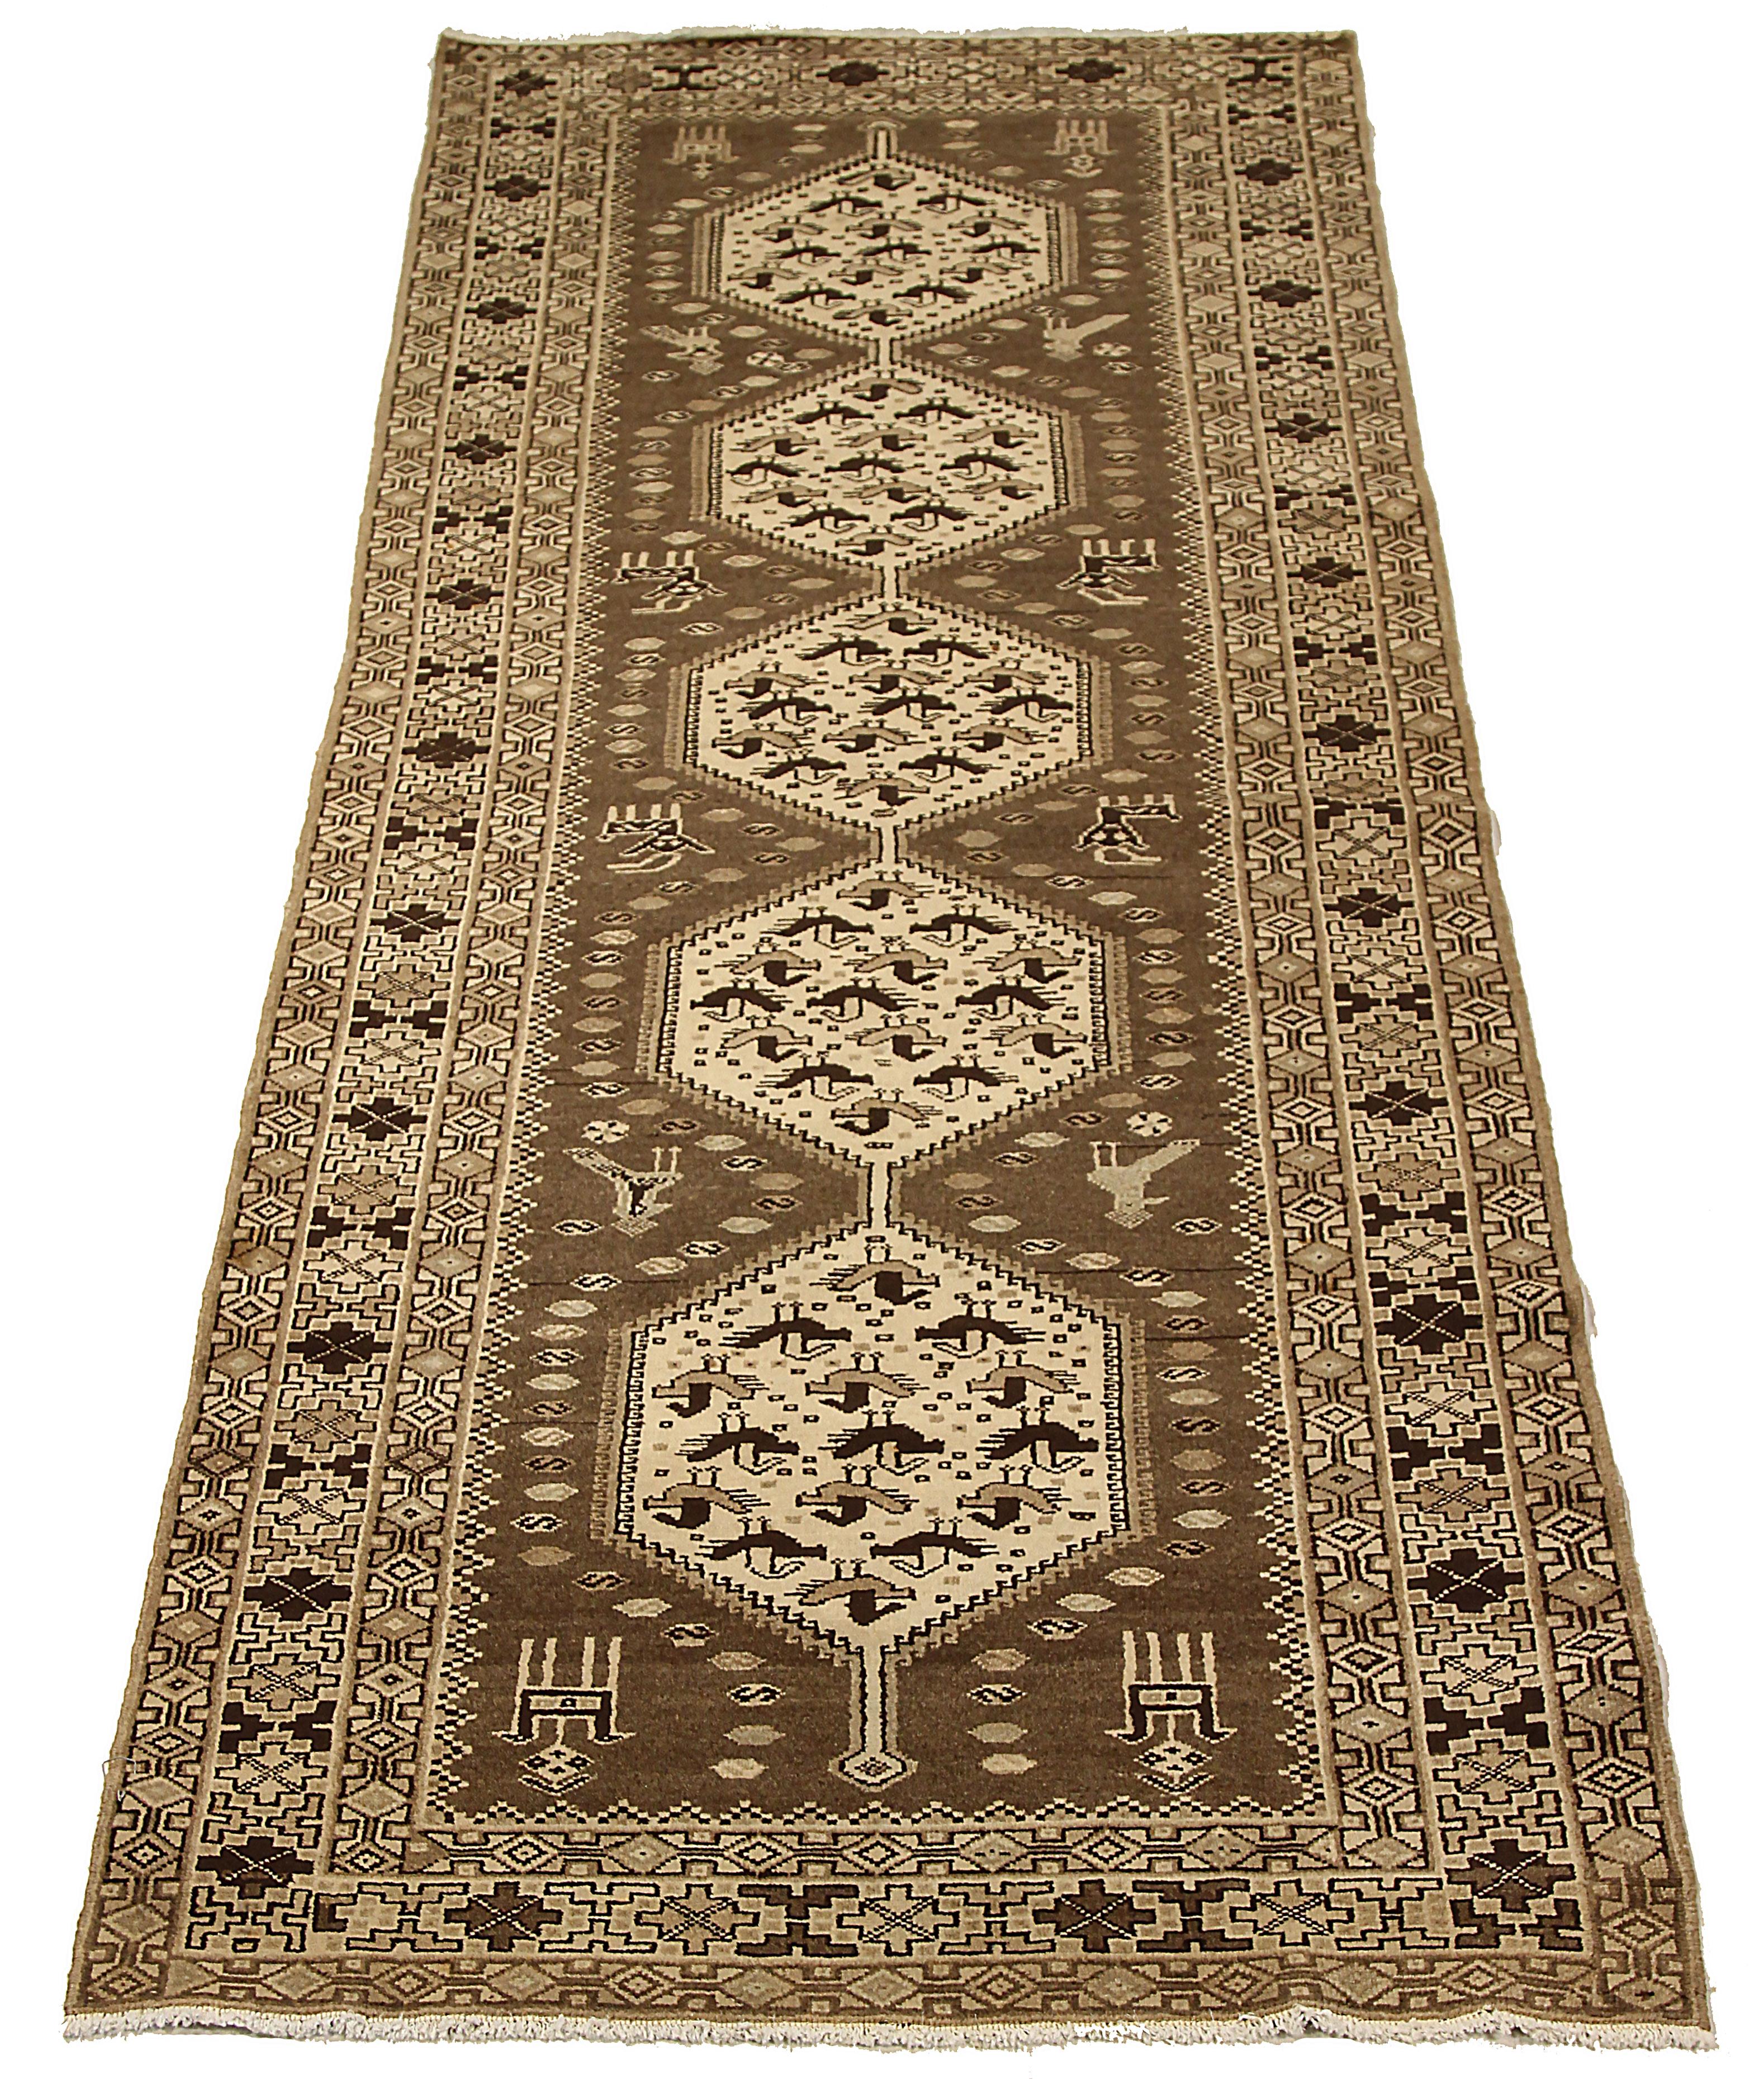 Antique Persian runner rug handmade from the highest quality of sheep’s wool. It’s colored with eco-friendly vegetable dyes that are safe for humans and pets alike. It’s a traditional Malayer design handwoven by expert artisans. It’s a lovely runner